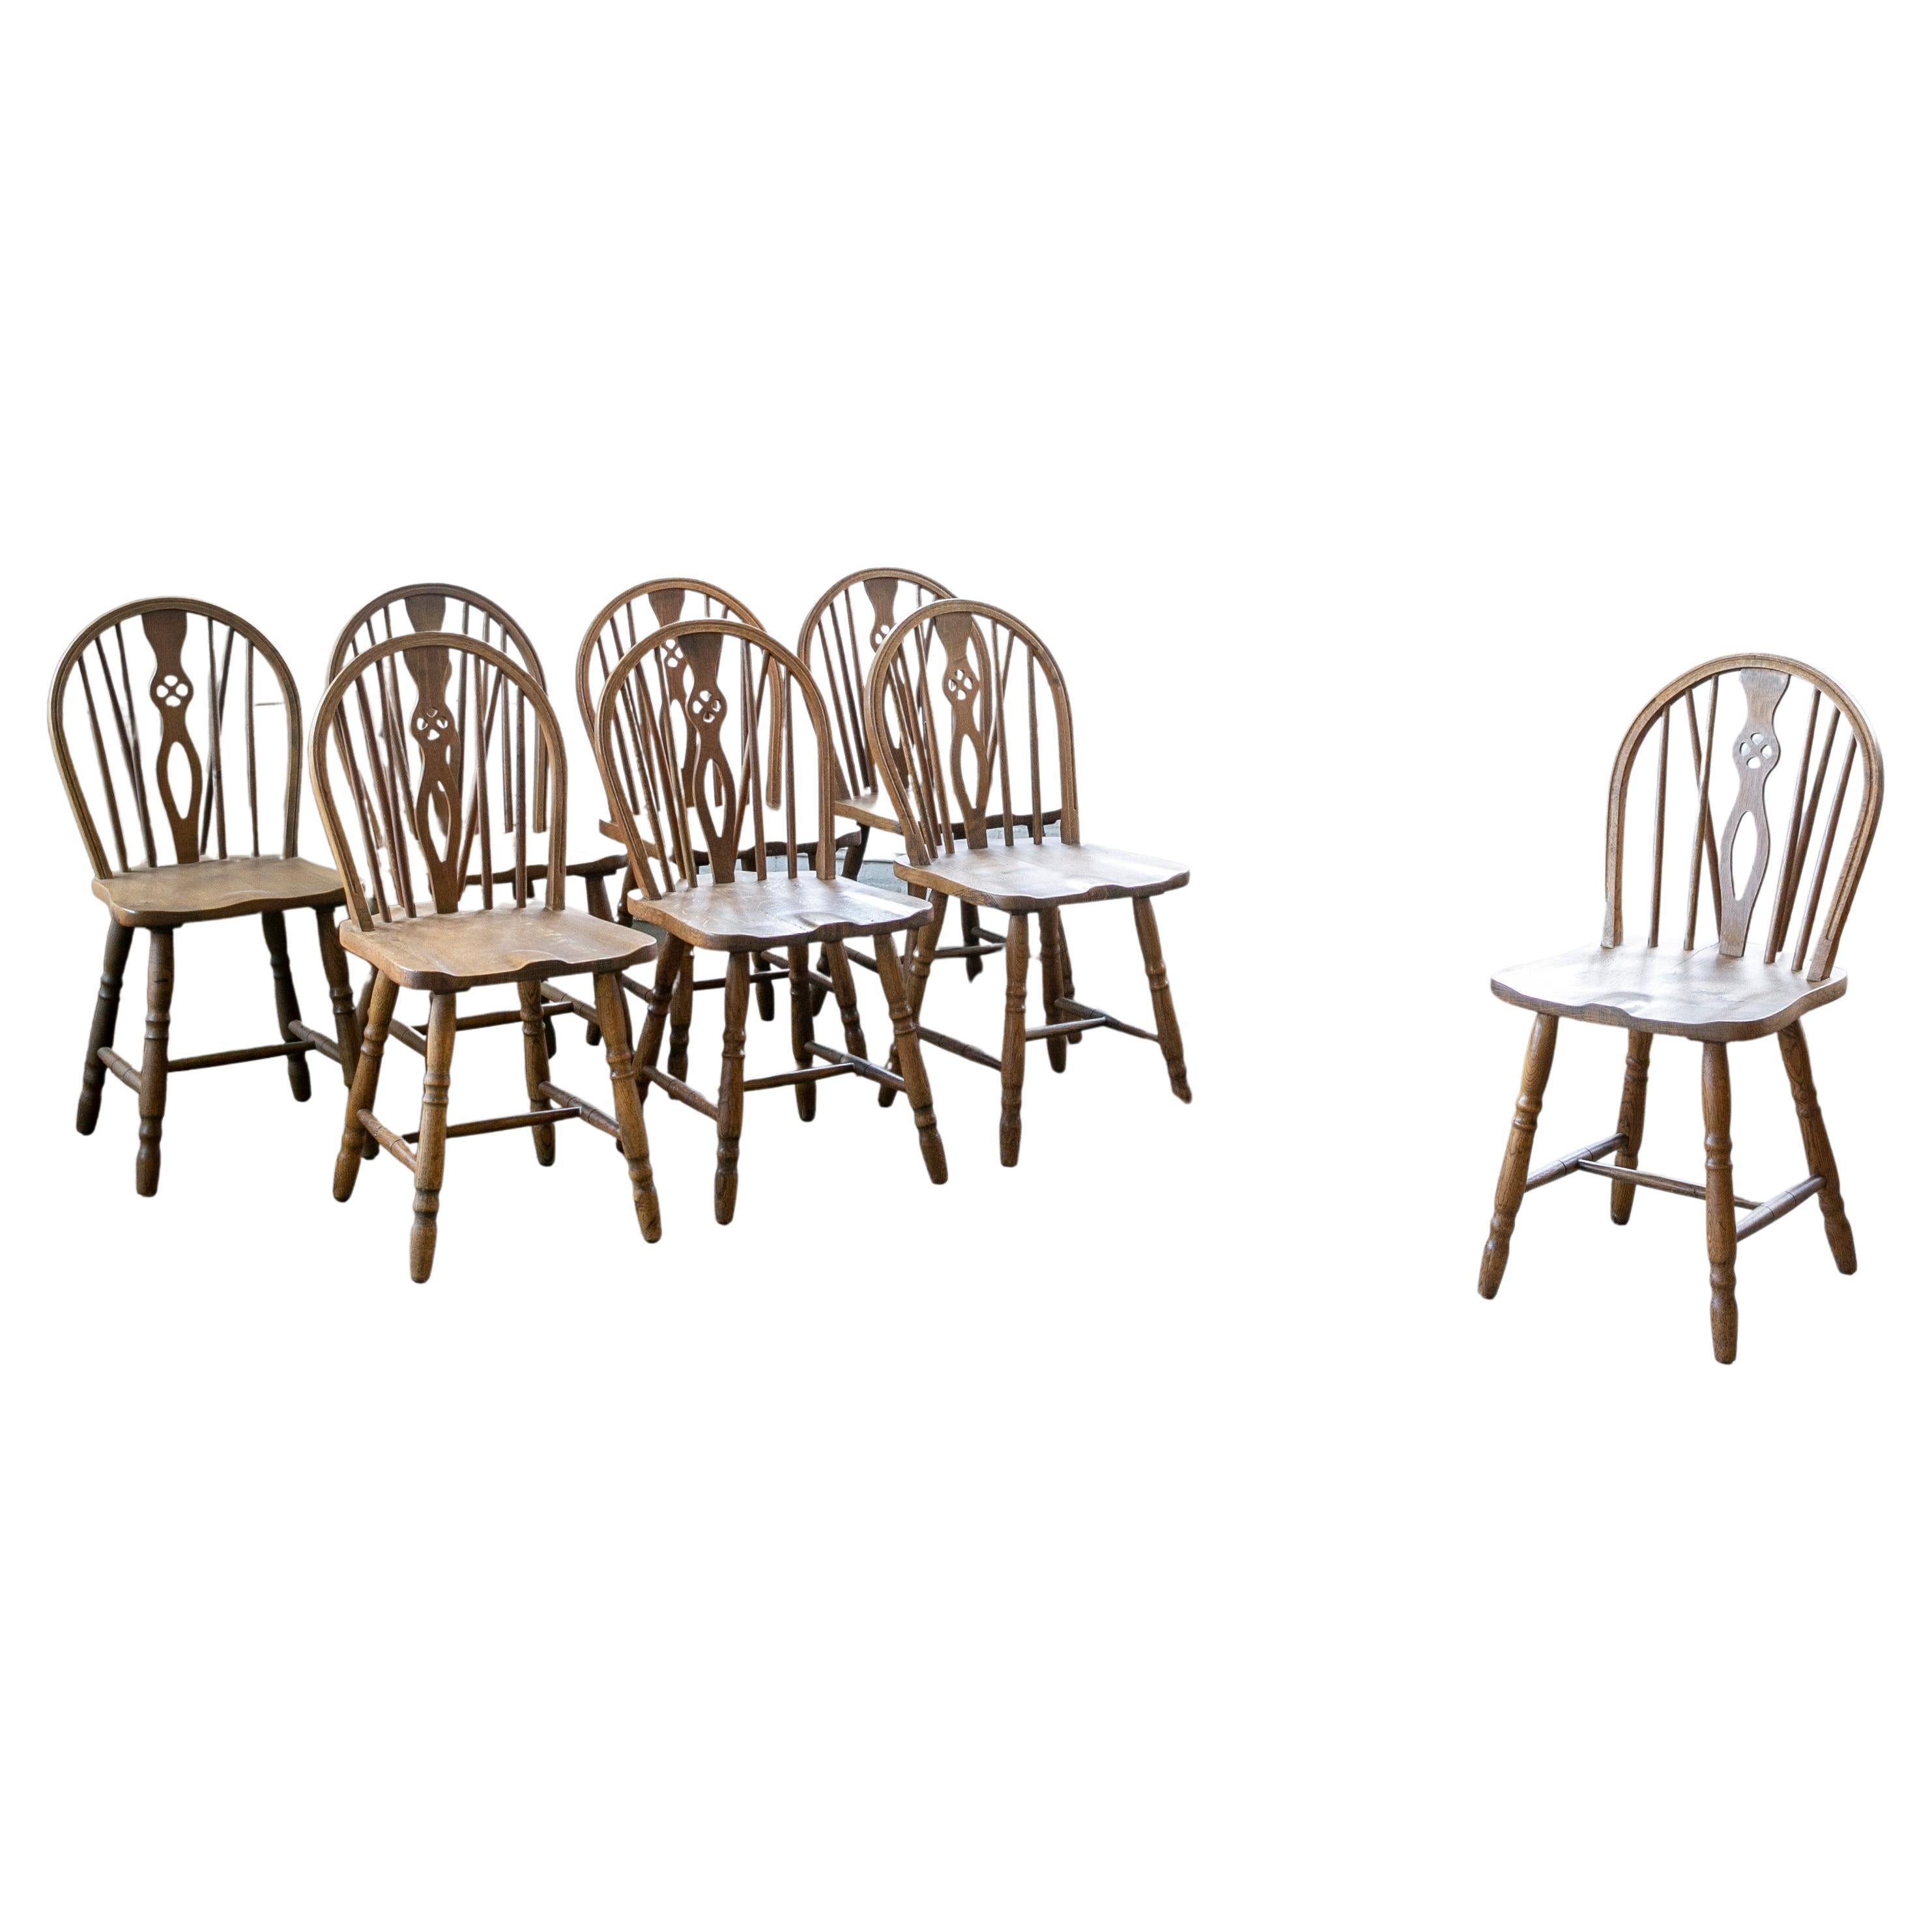 Set of 8 Danish Windsor Style Dining Chairs, Early to Mid-1900s in Stained Oak For Sale